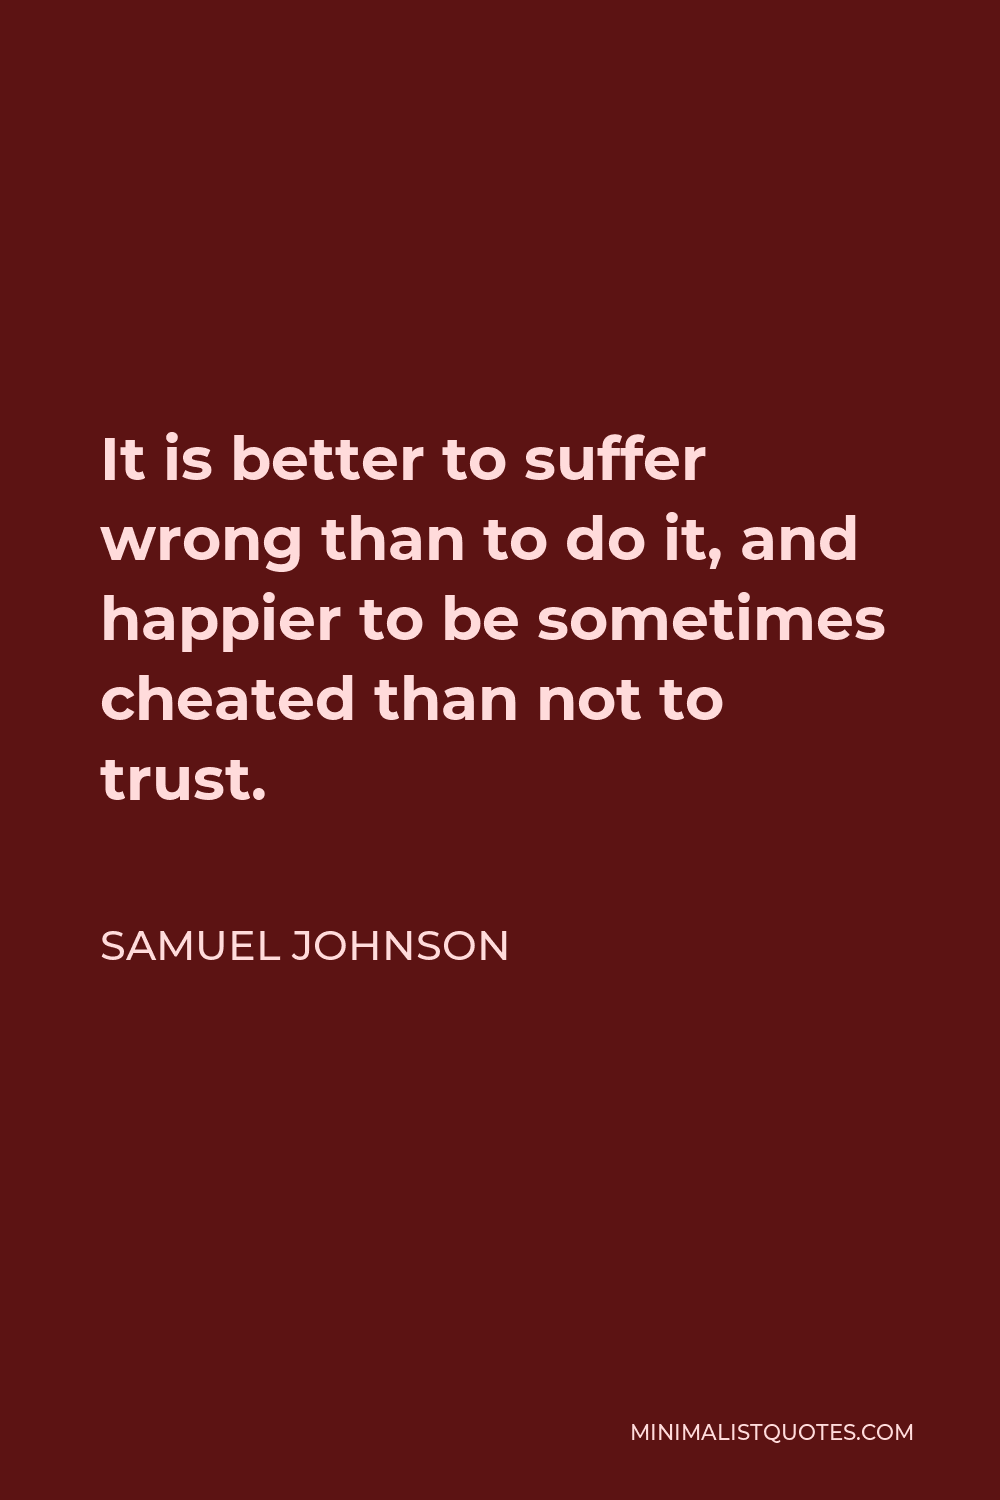 Samuel Johnson Quote - It is better to suffer wrong than to do it, and happier to be sometimes cheated than not to trust.